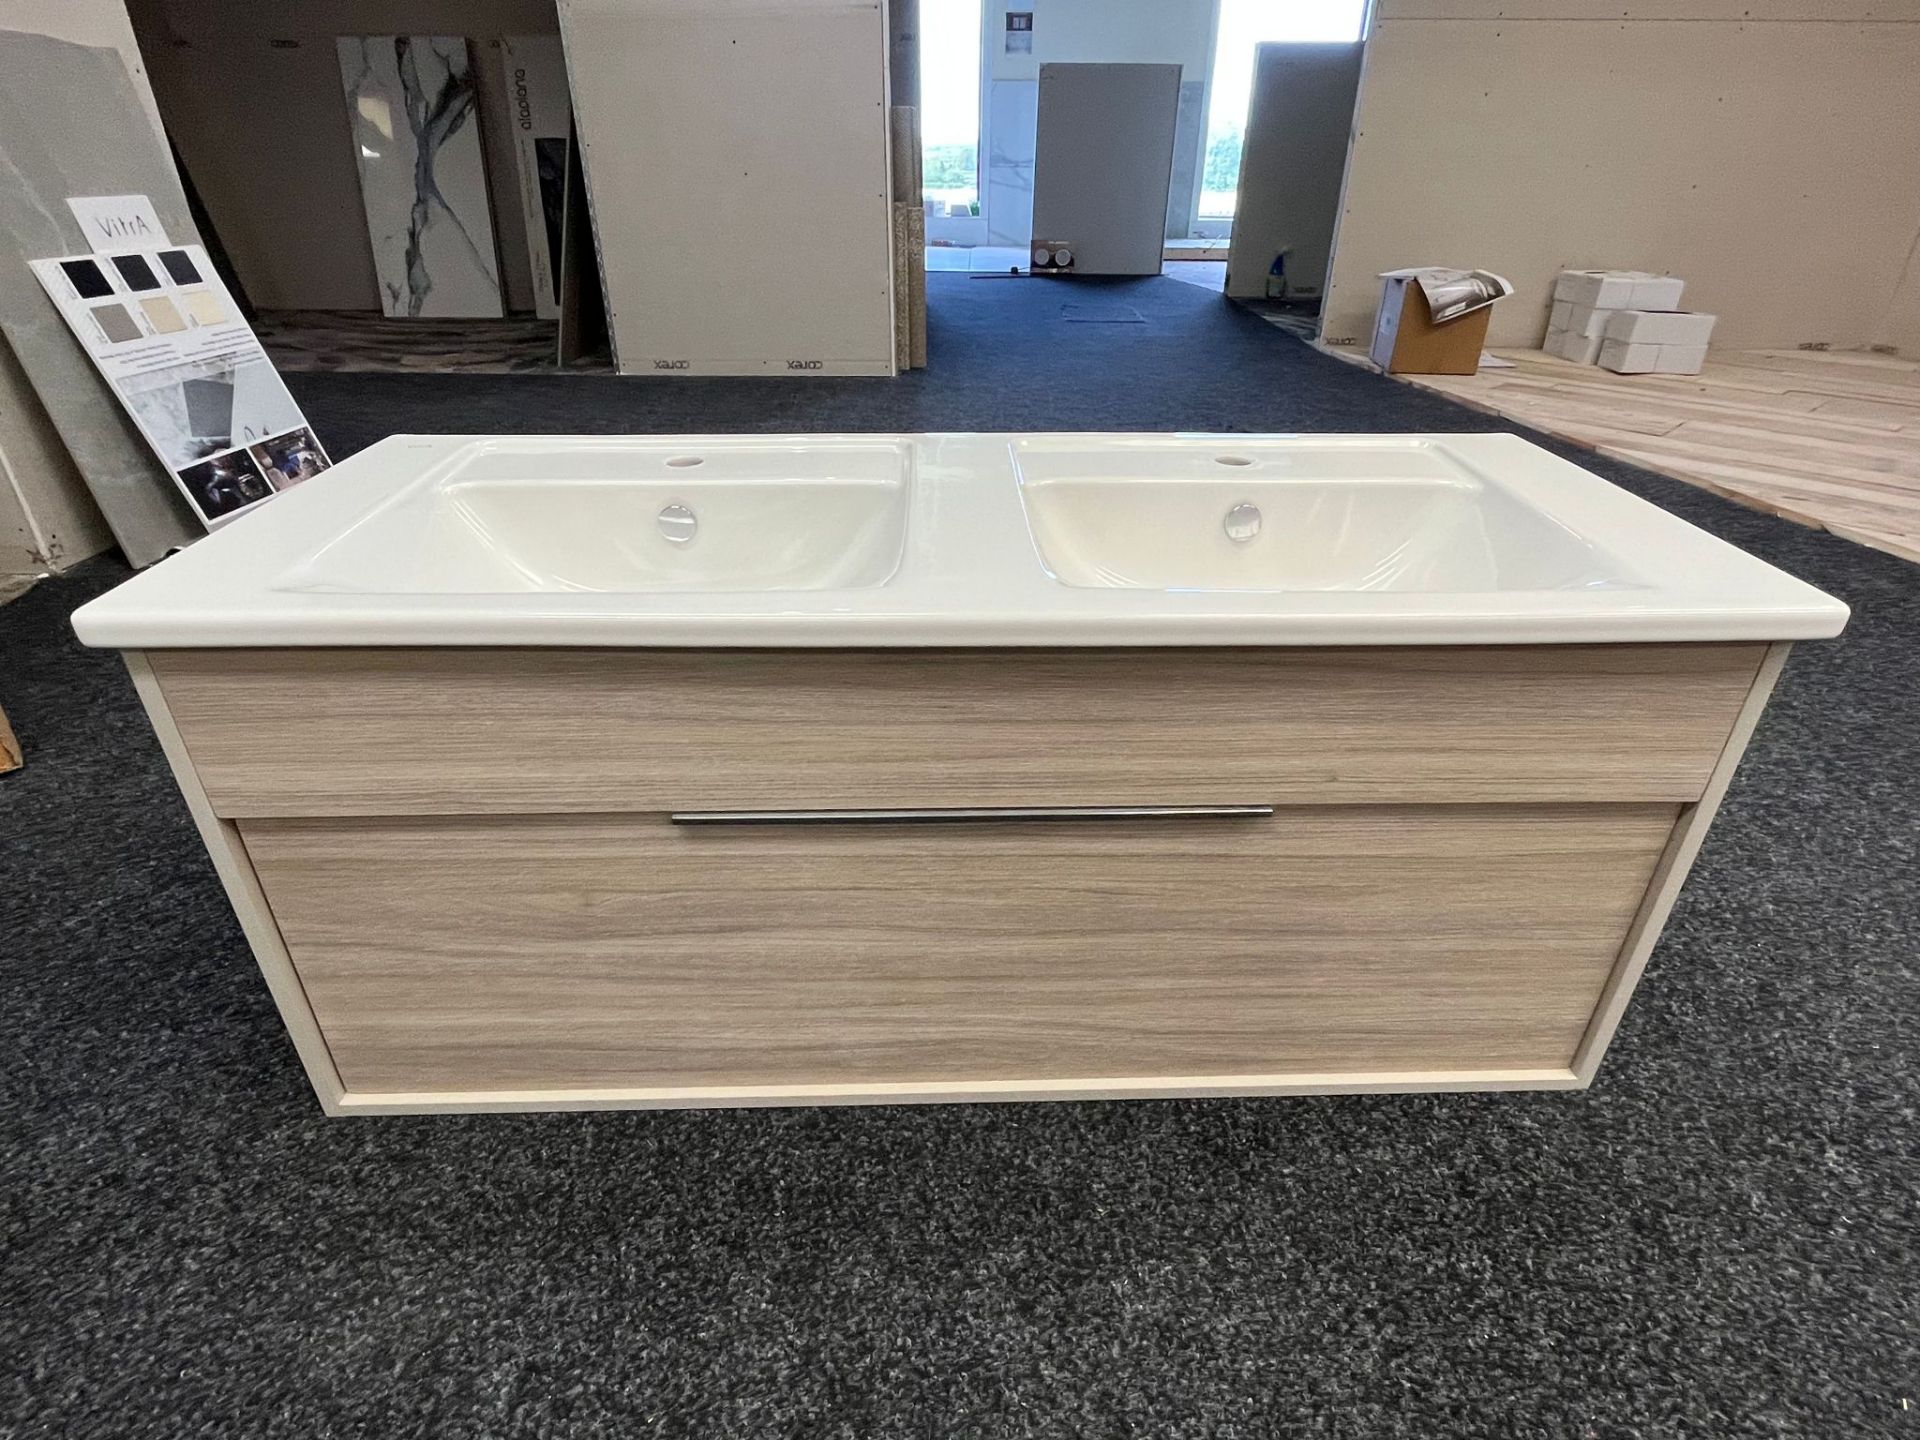 1 x Vitra double vanity unit and sink with wastes